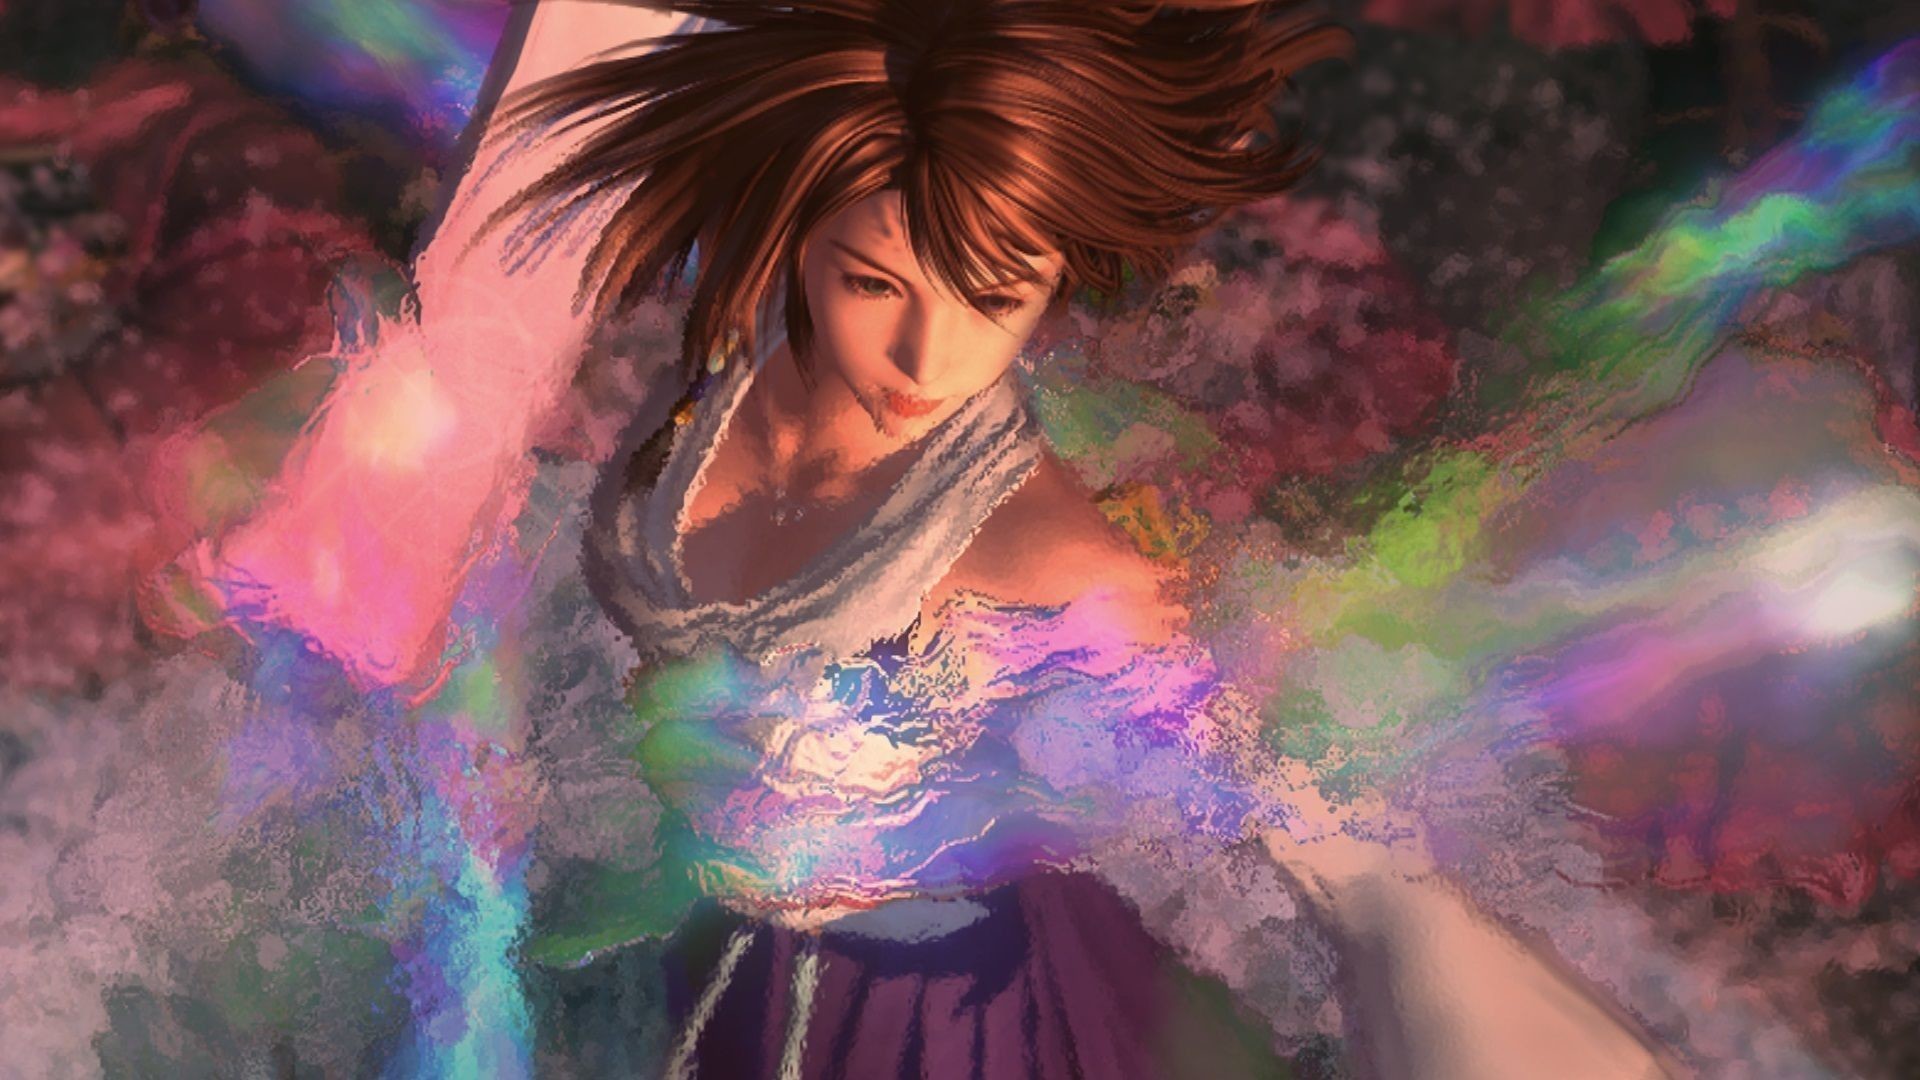 Final Fantasy X Wallpaper 70 Pictures